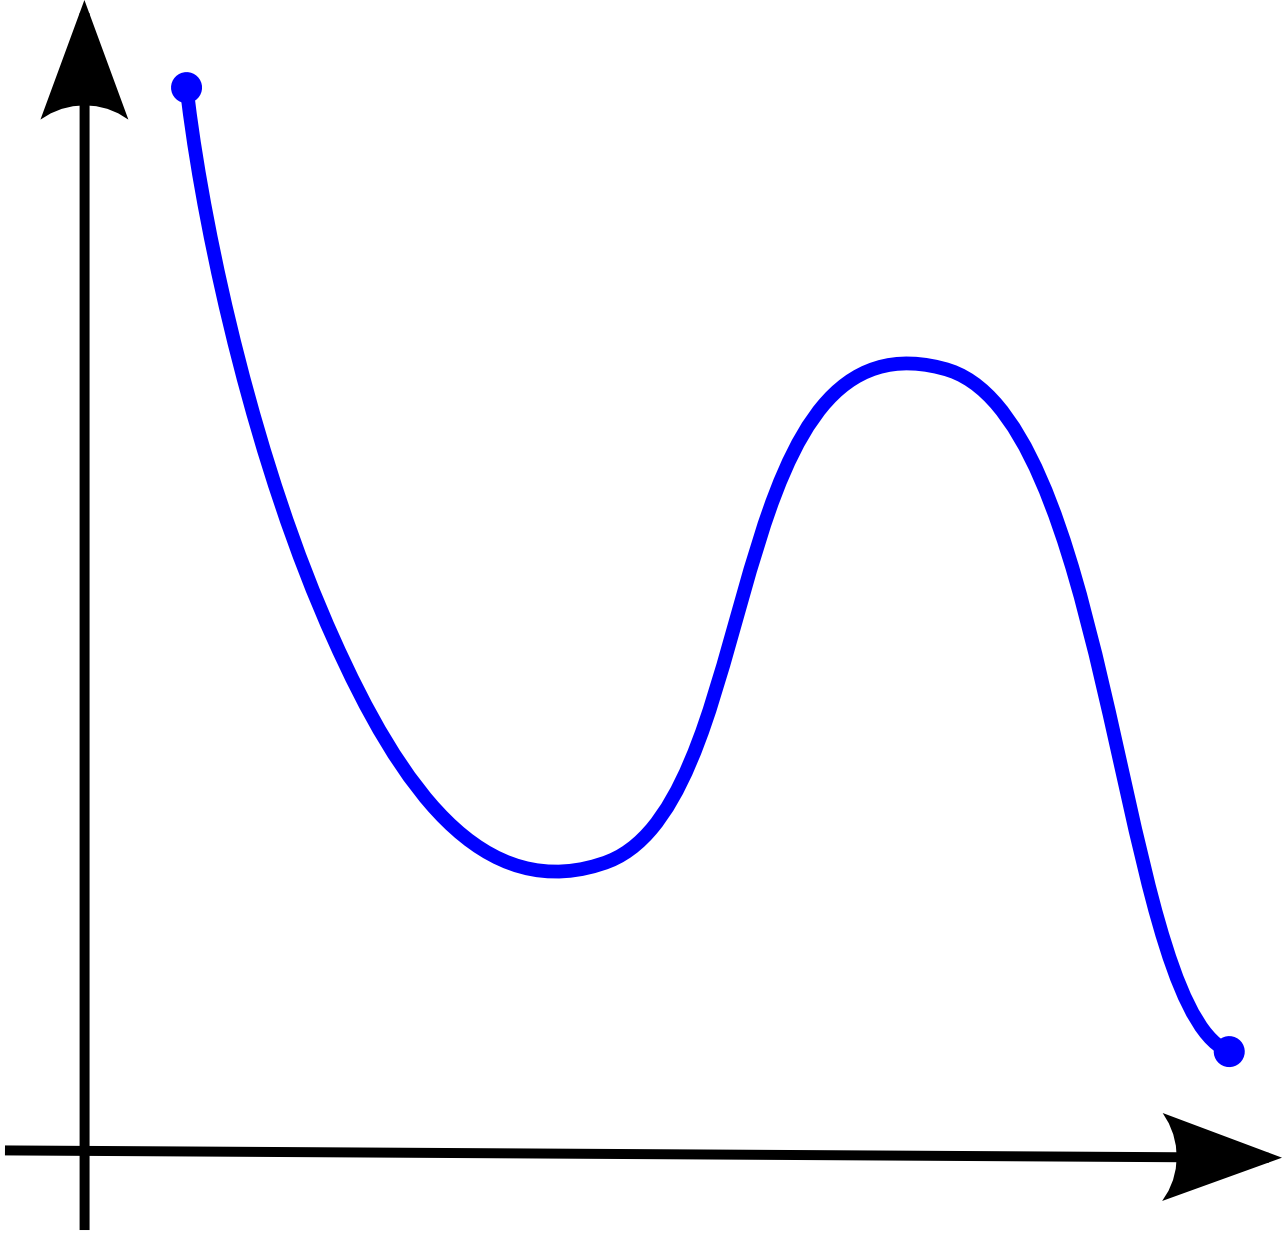 An example of a non-monotonic function